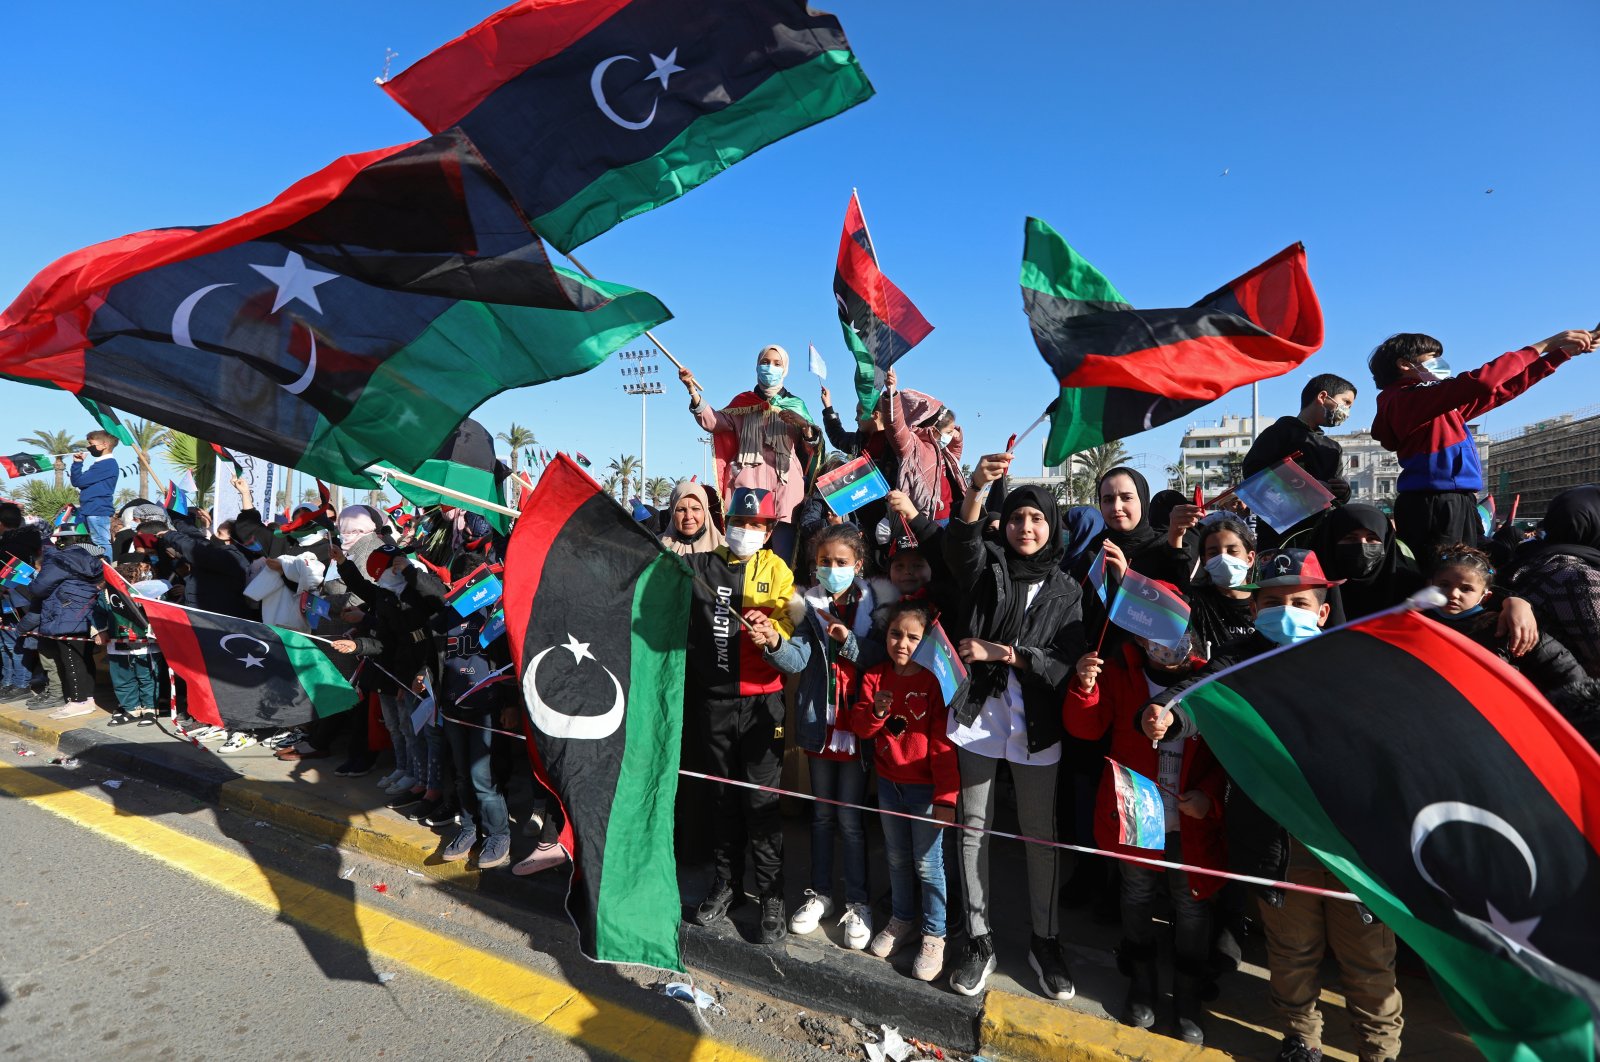 Under tight security, Libyans mark the 10th anniversary of their 2011 uprising that led to the overthrow and killing of longtime ruler Moammar Gadhafi in Martyrs Square, Tripoli, Libya. (AP File Photo)